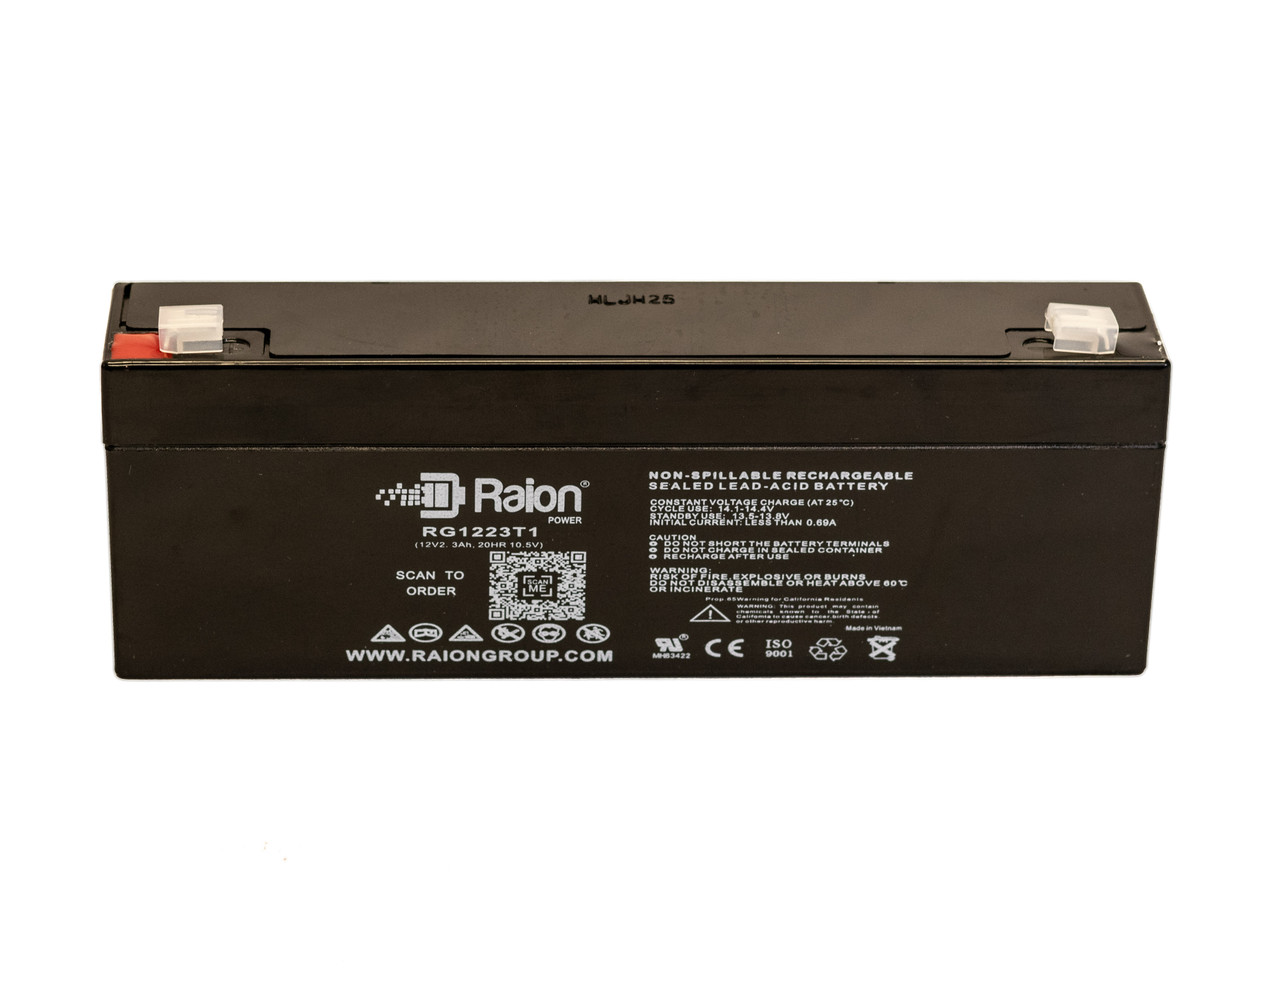 Raion Power 12V 2.3Ah SLA Battery With T1 Terminals For Narco Air Shields AS70 Volume Infusion Pump